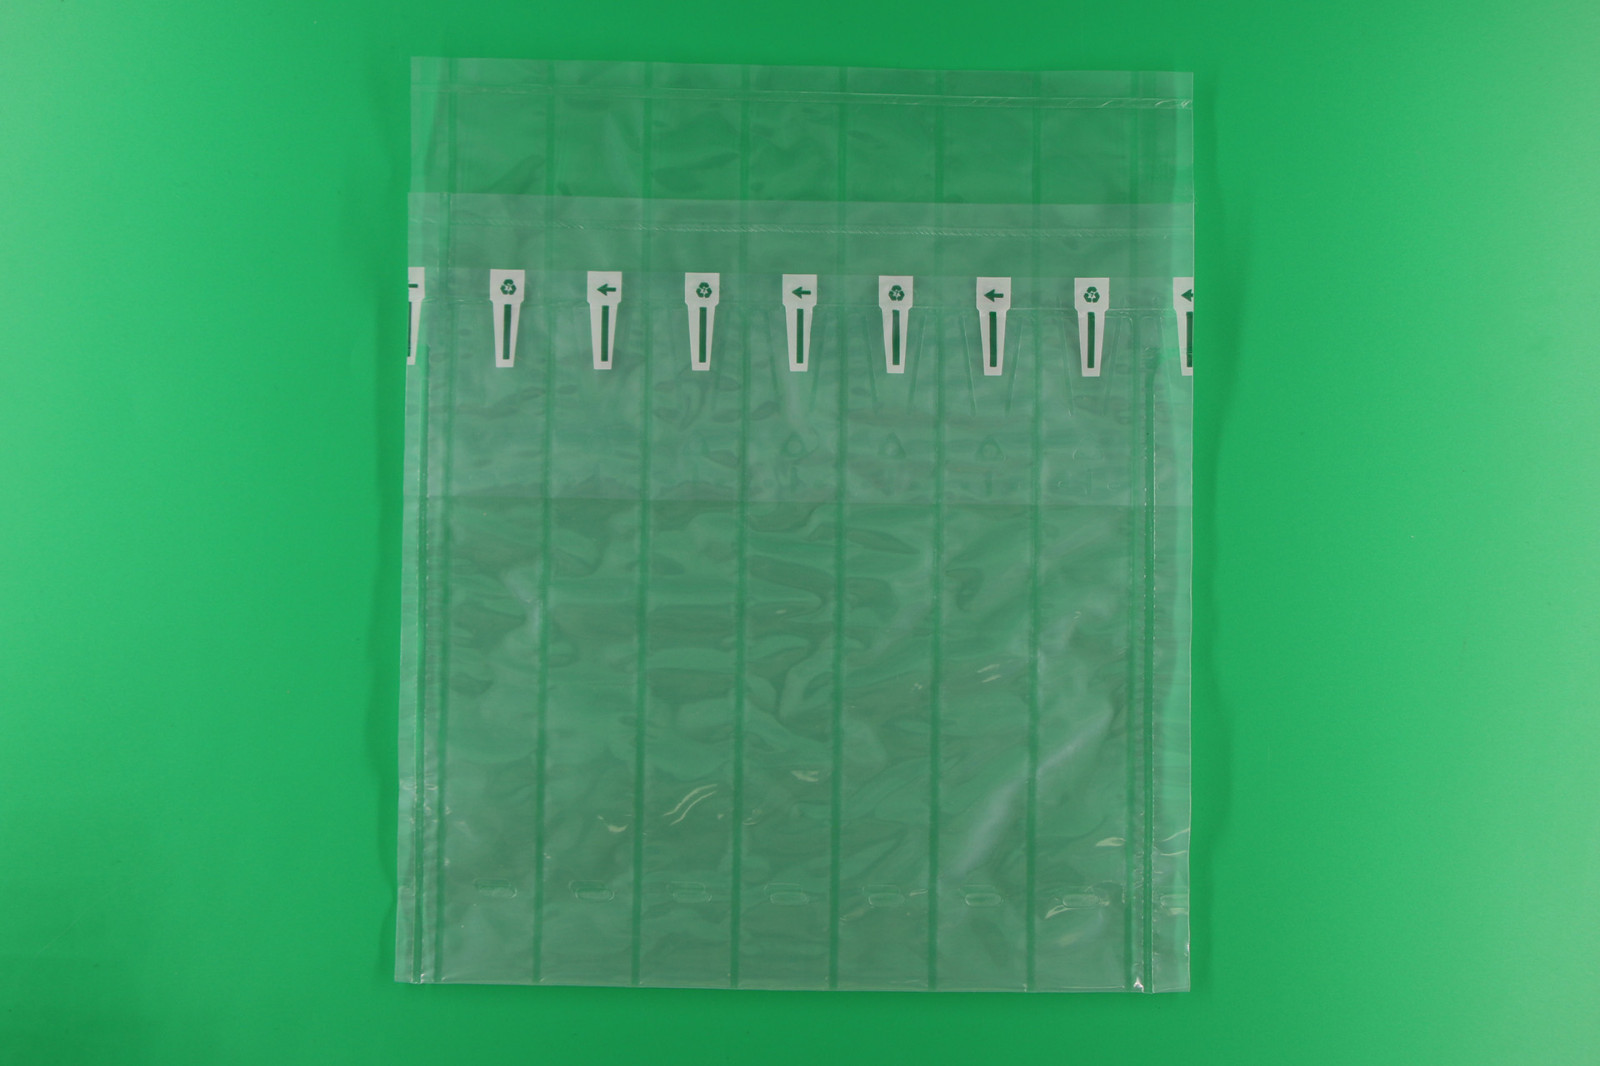 Sunshinepack high-quality air column packing at discount for goods